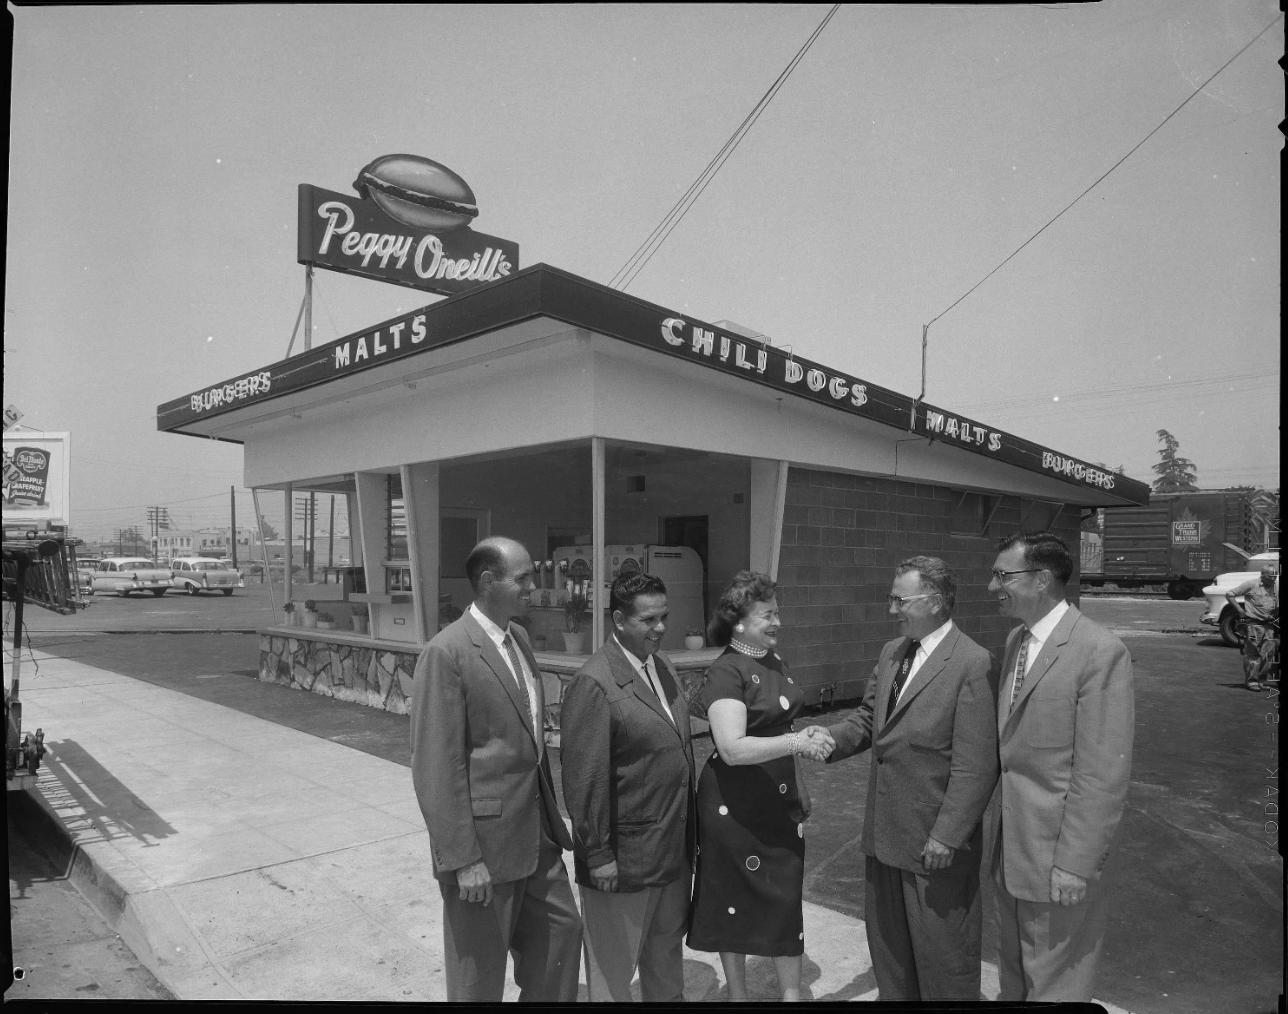 Peggy O'neill's fast-food restaurant, somewhere in Los Angeles County, 8/6/1958.